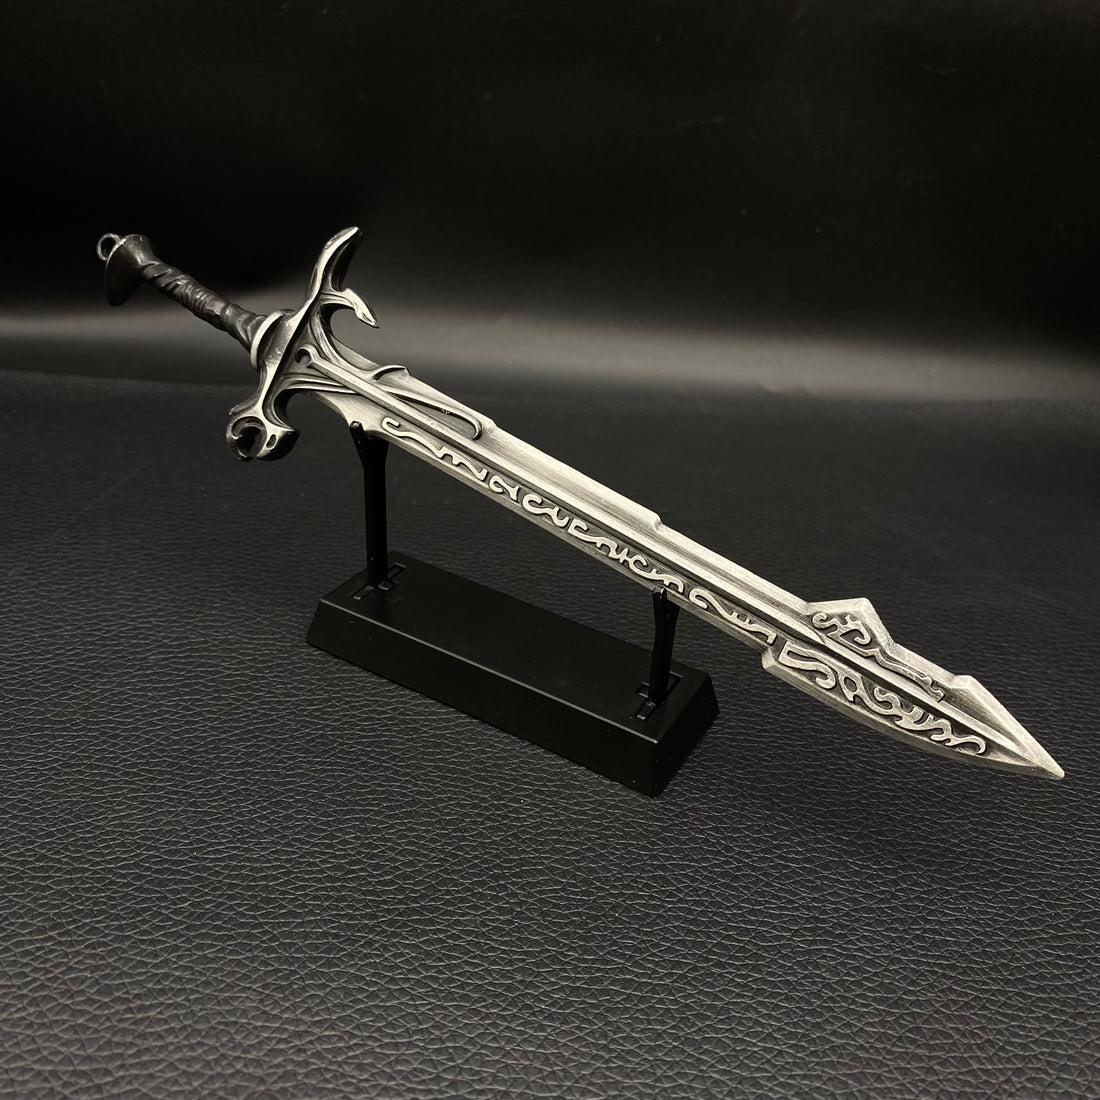 Introducing the Ancient Nord Sword Eduj: A Stunning Miniature Replica from Skyrim